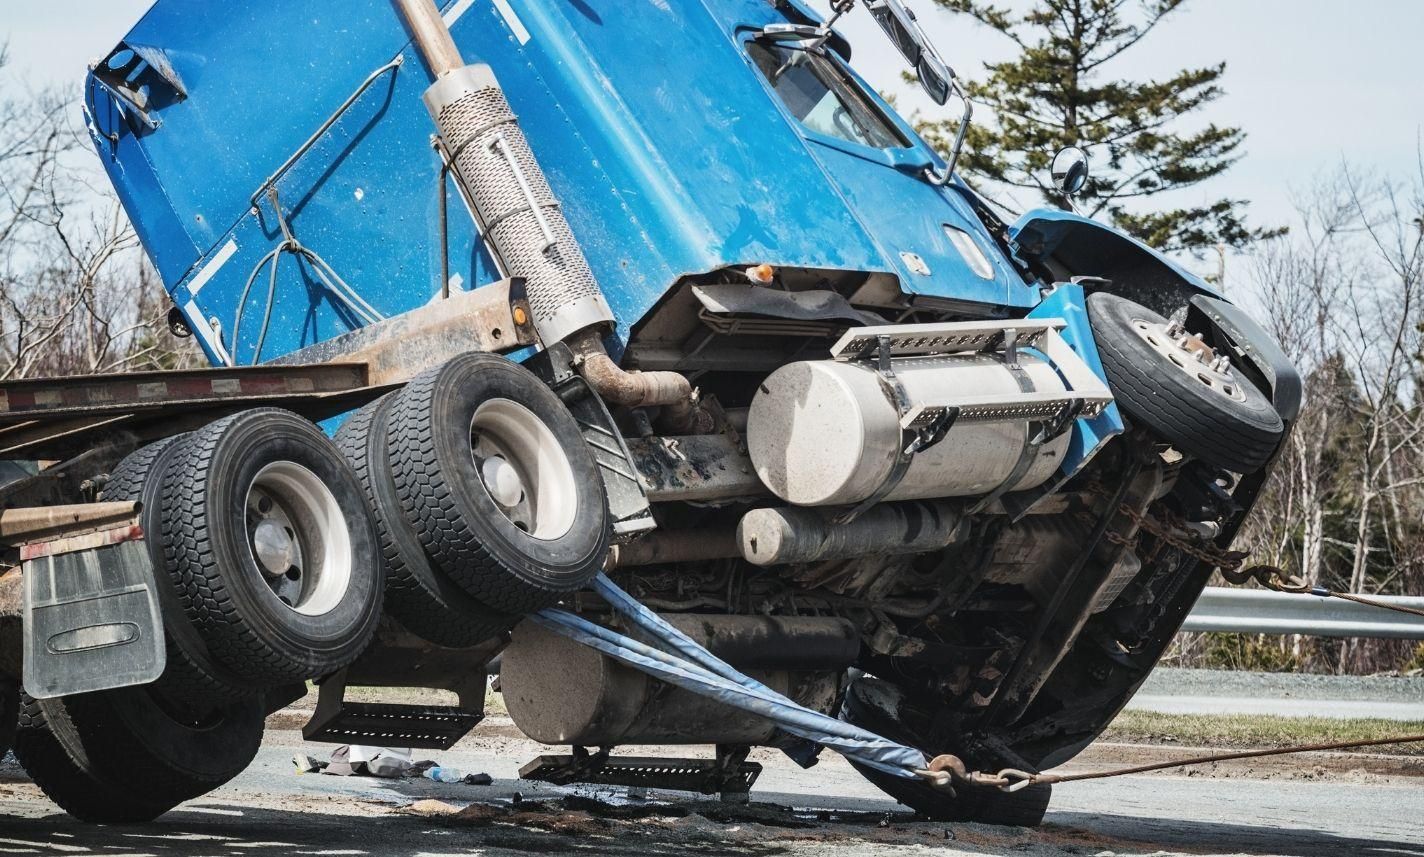 unionville-commercial-truck-accident-injury-lawyer